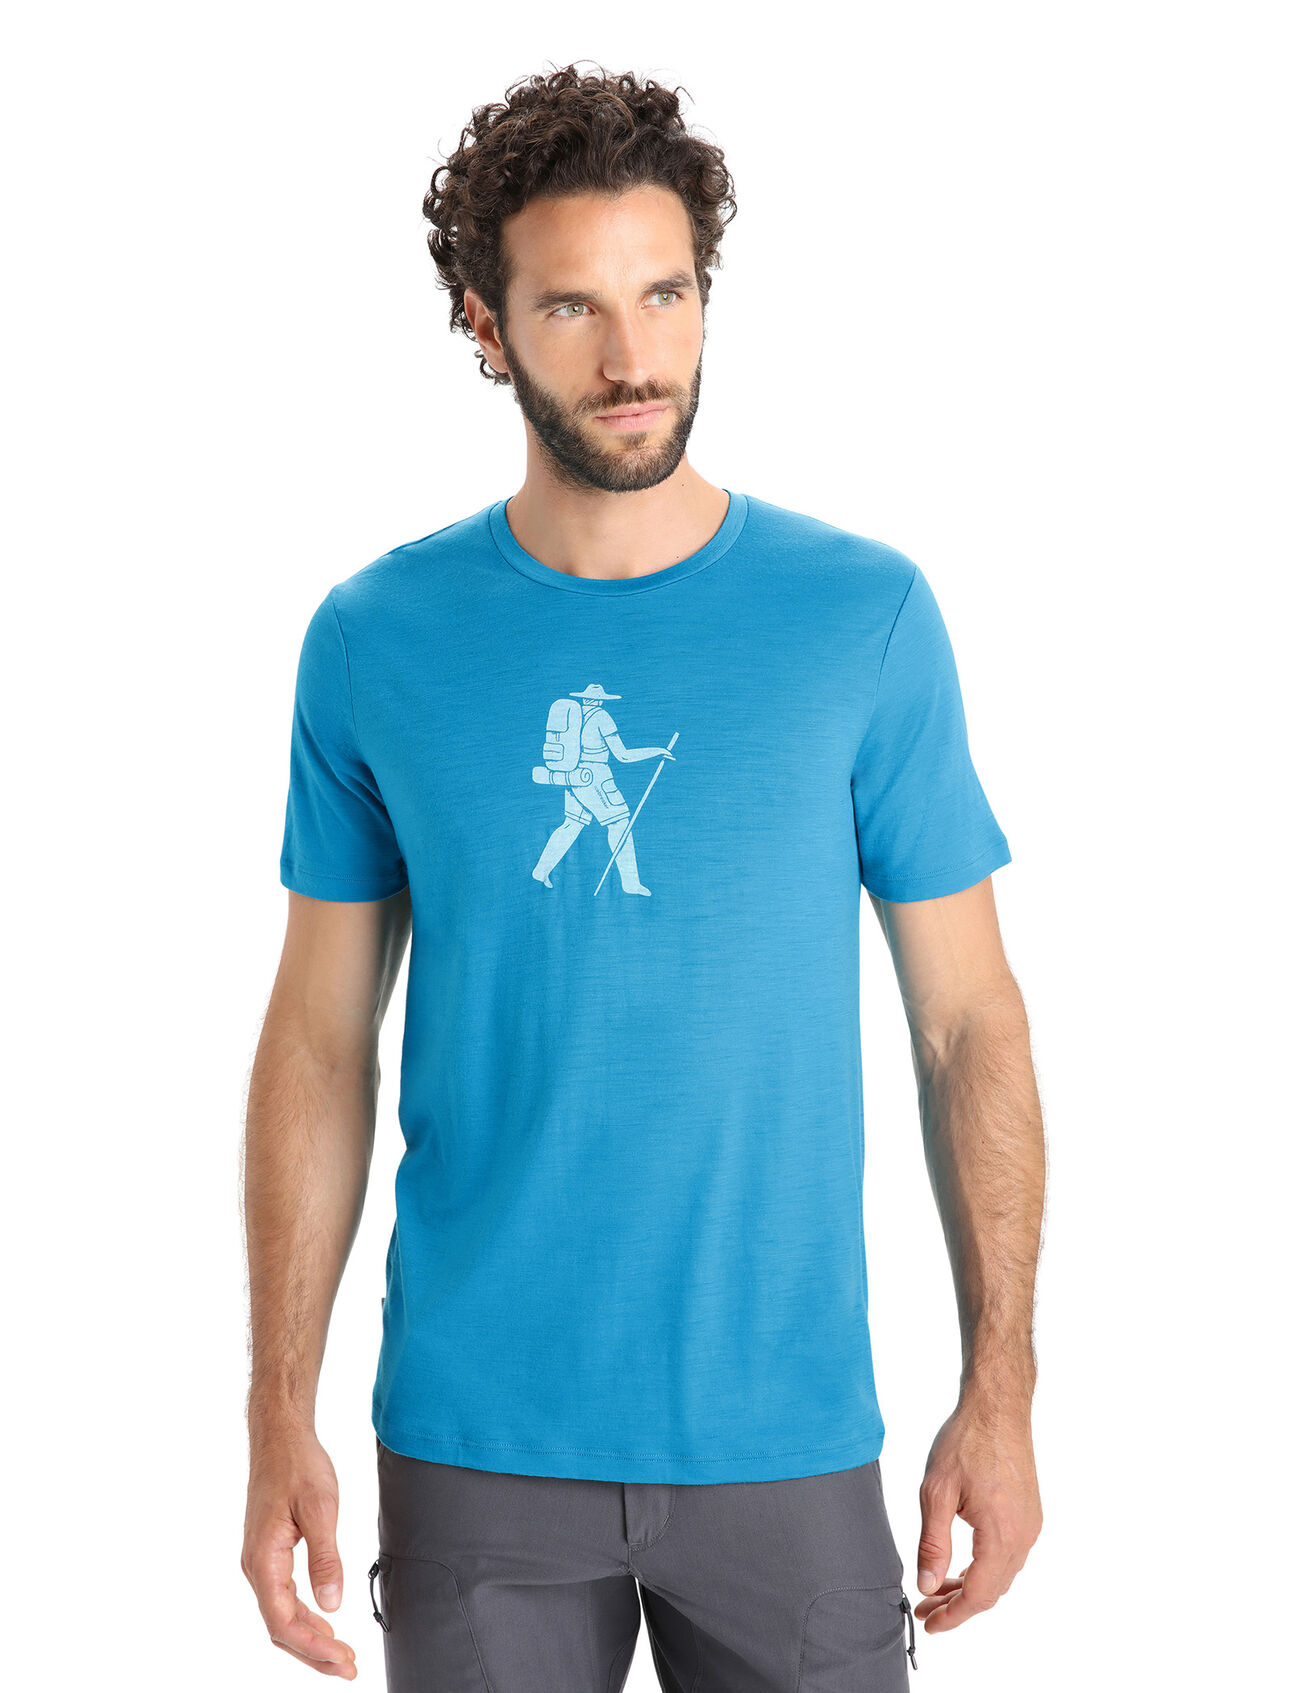 Mens Merino Tech Lite II Short Sleeve T-Shirt Trail Hiker Our versatile tech tee that provides comfort, breathability and natural odour-resistance for any adventure you can think of, the Tech Lite II Short Sleeve Tee Trail Hiker features 100% merino for all-natural performance. The original artwork by Mark Conlan captures the simple joy of being out in nature with camp on your back.